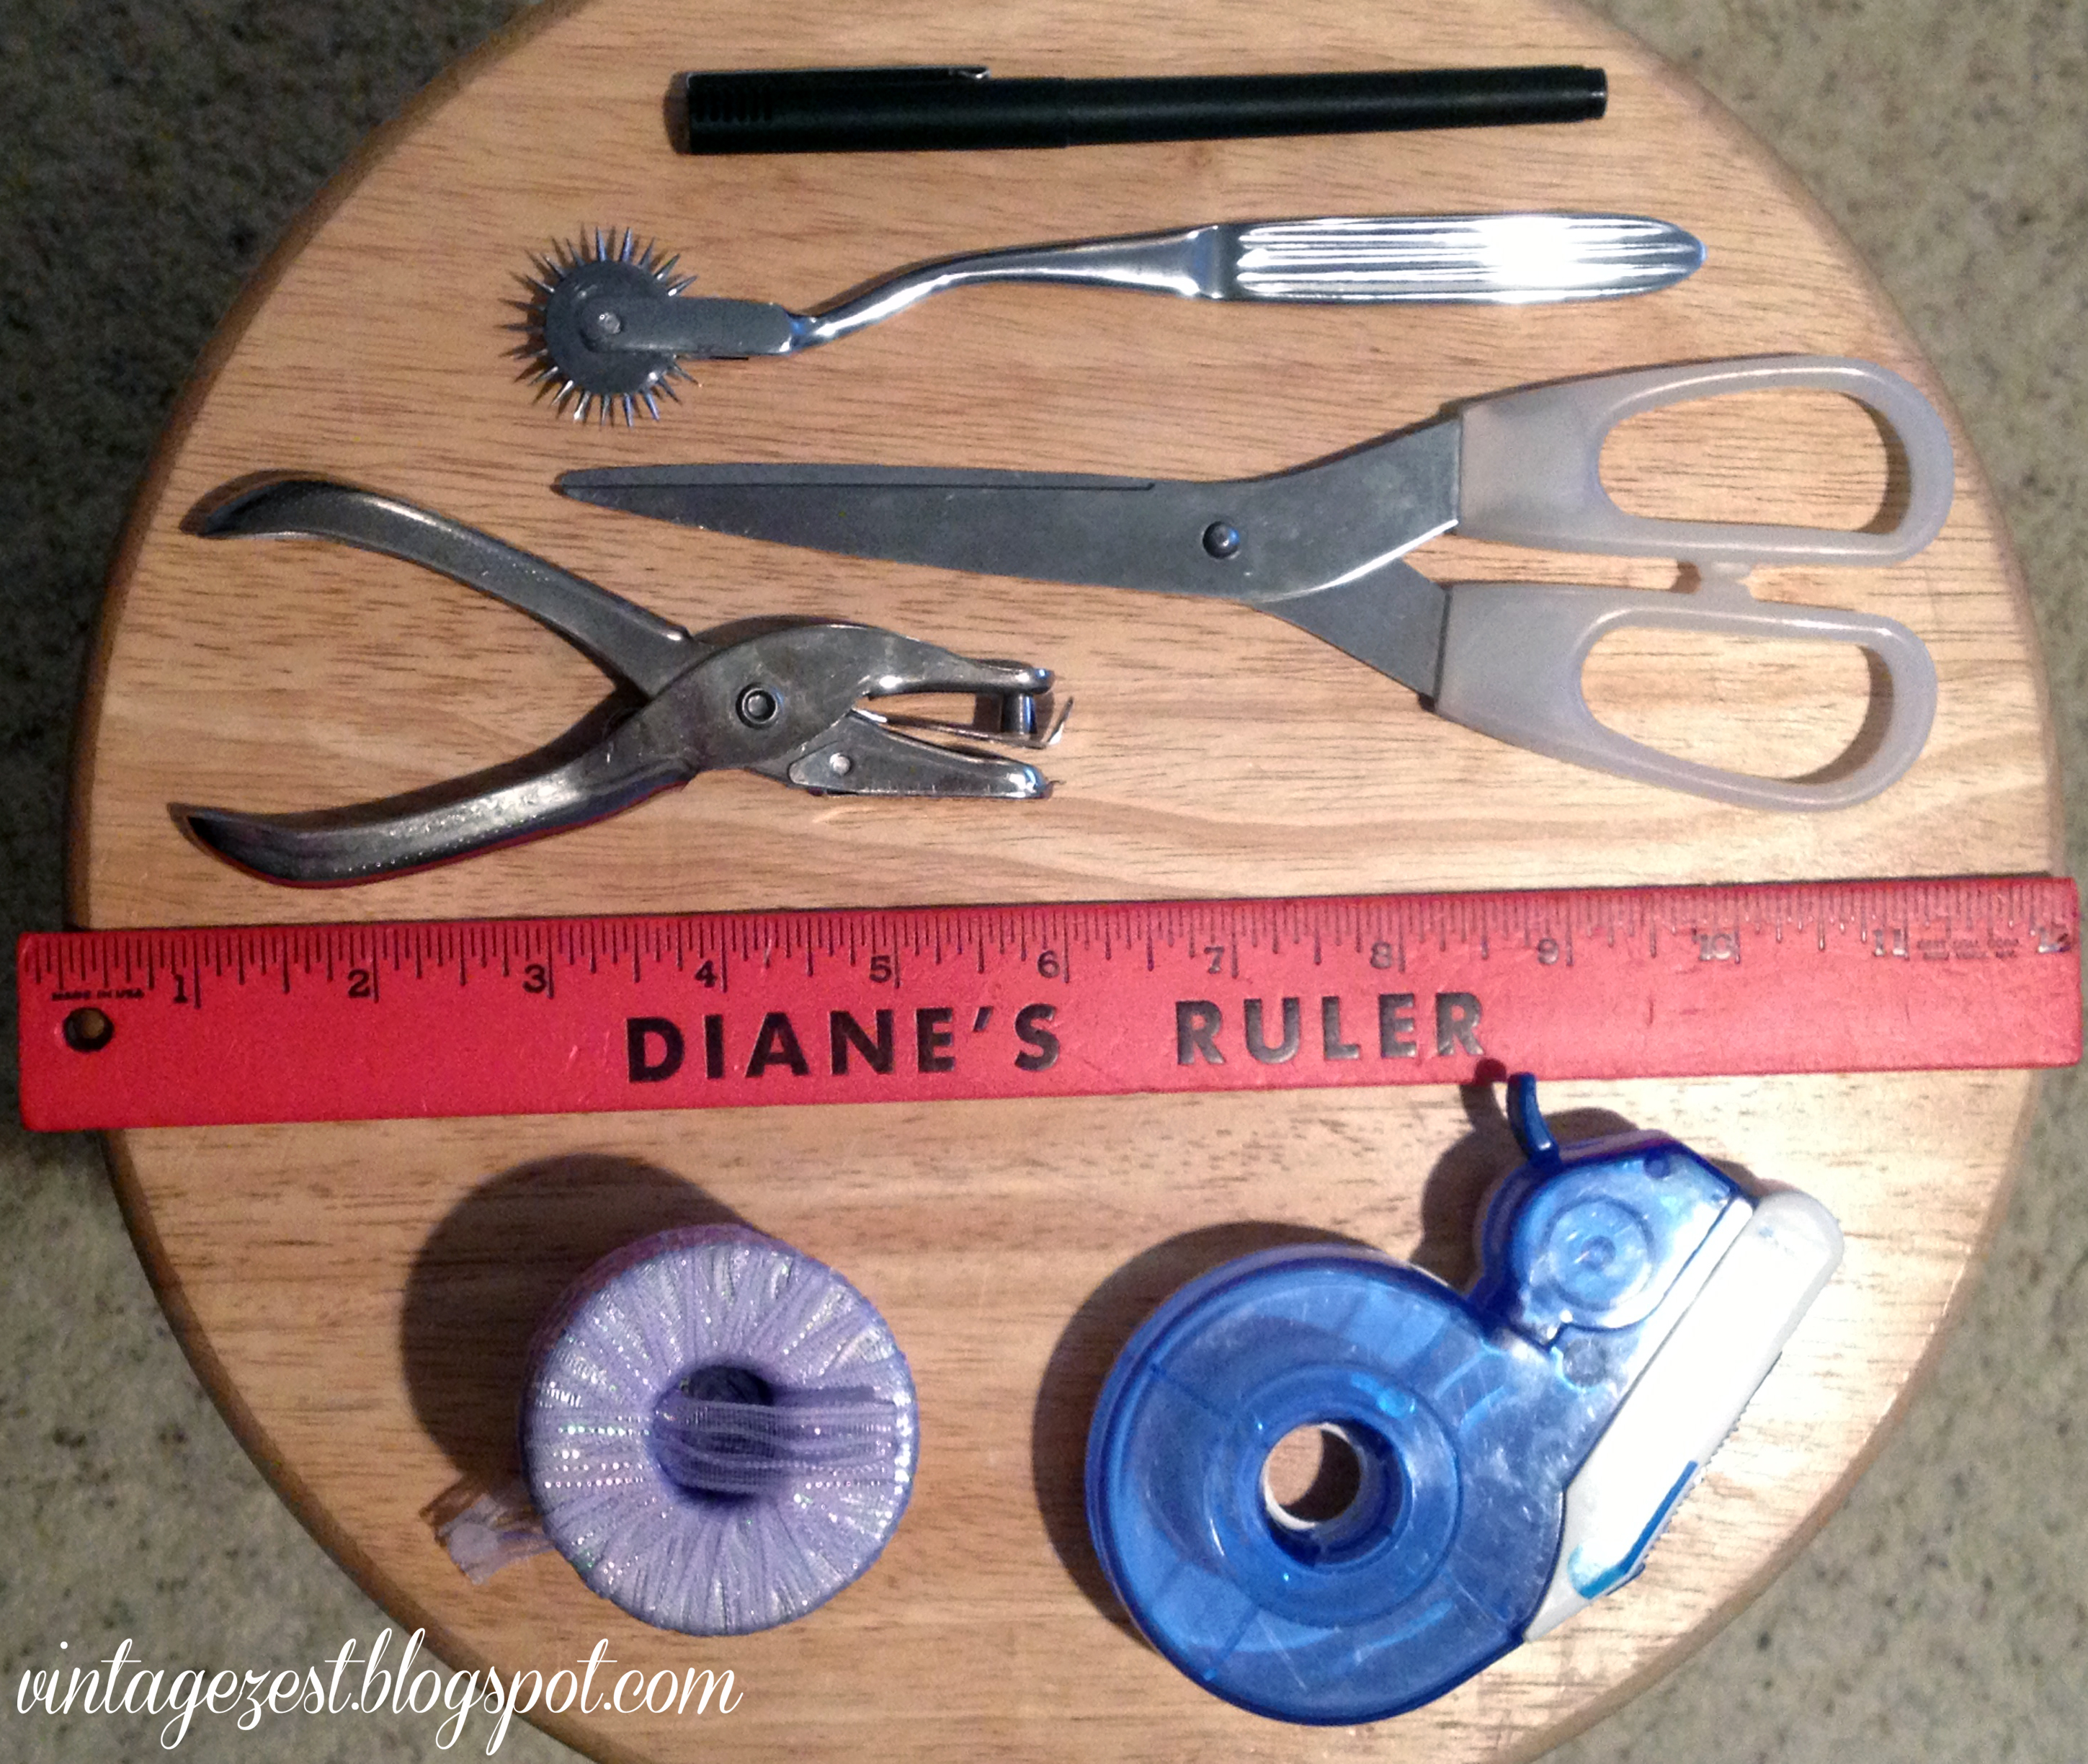 Tools For Tracing Sewing Patterns on Diane's Vintage Zest!